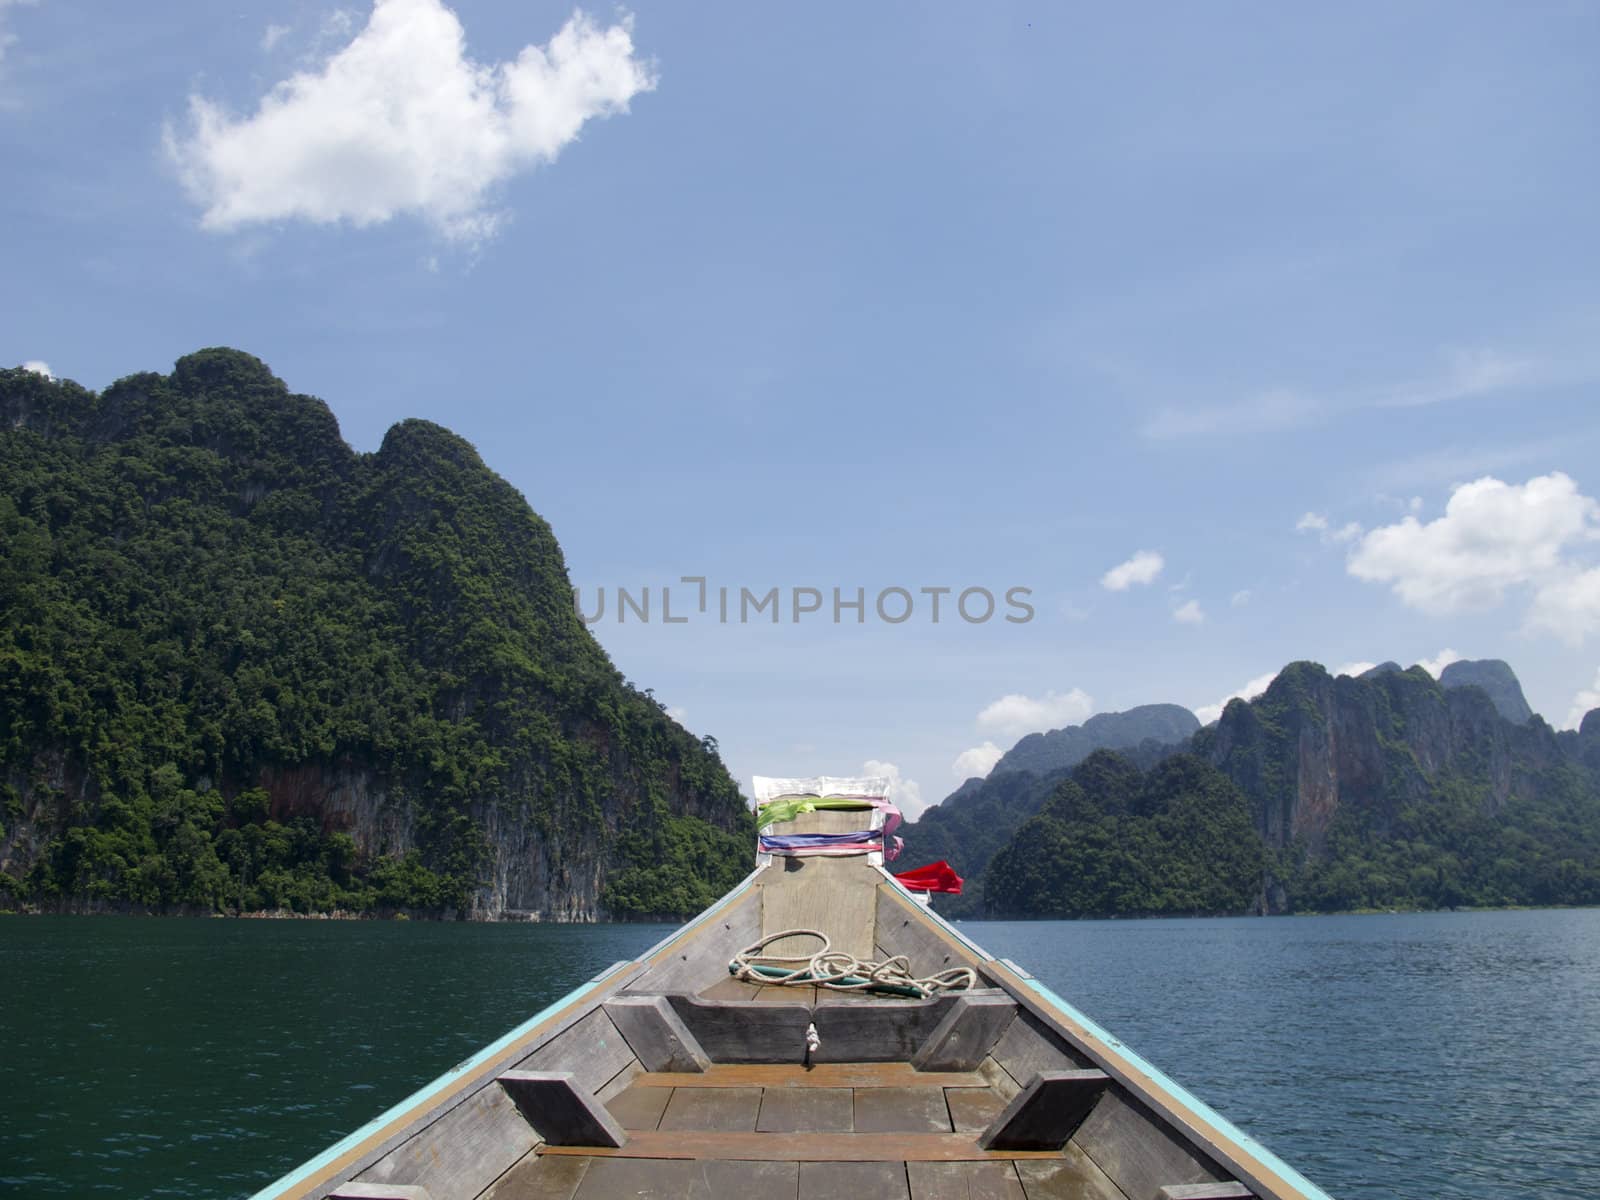 Cloud, Sky, Mountain , Boat and Ratchapapa Dam, Thailand by dul_ny